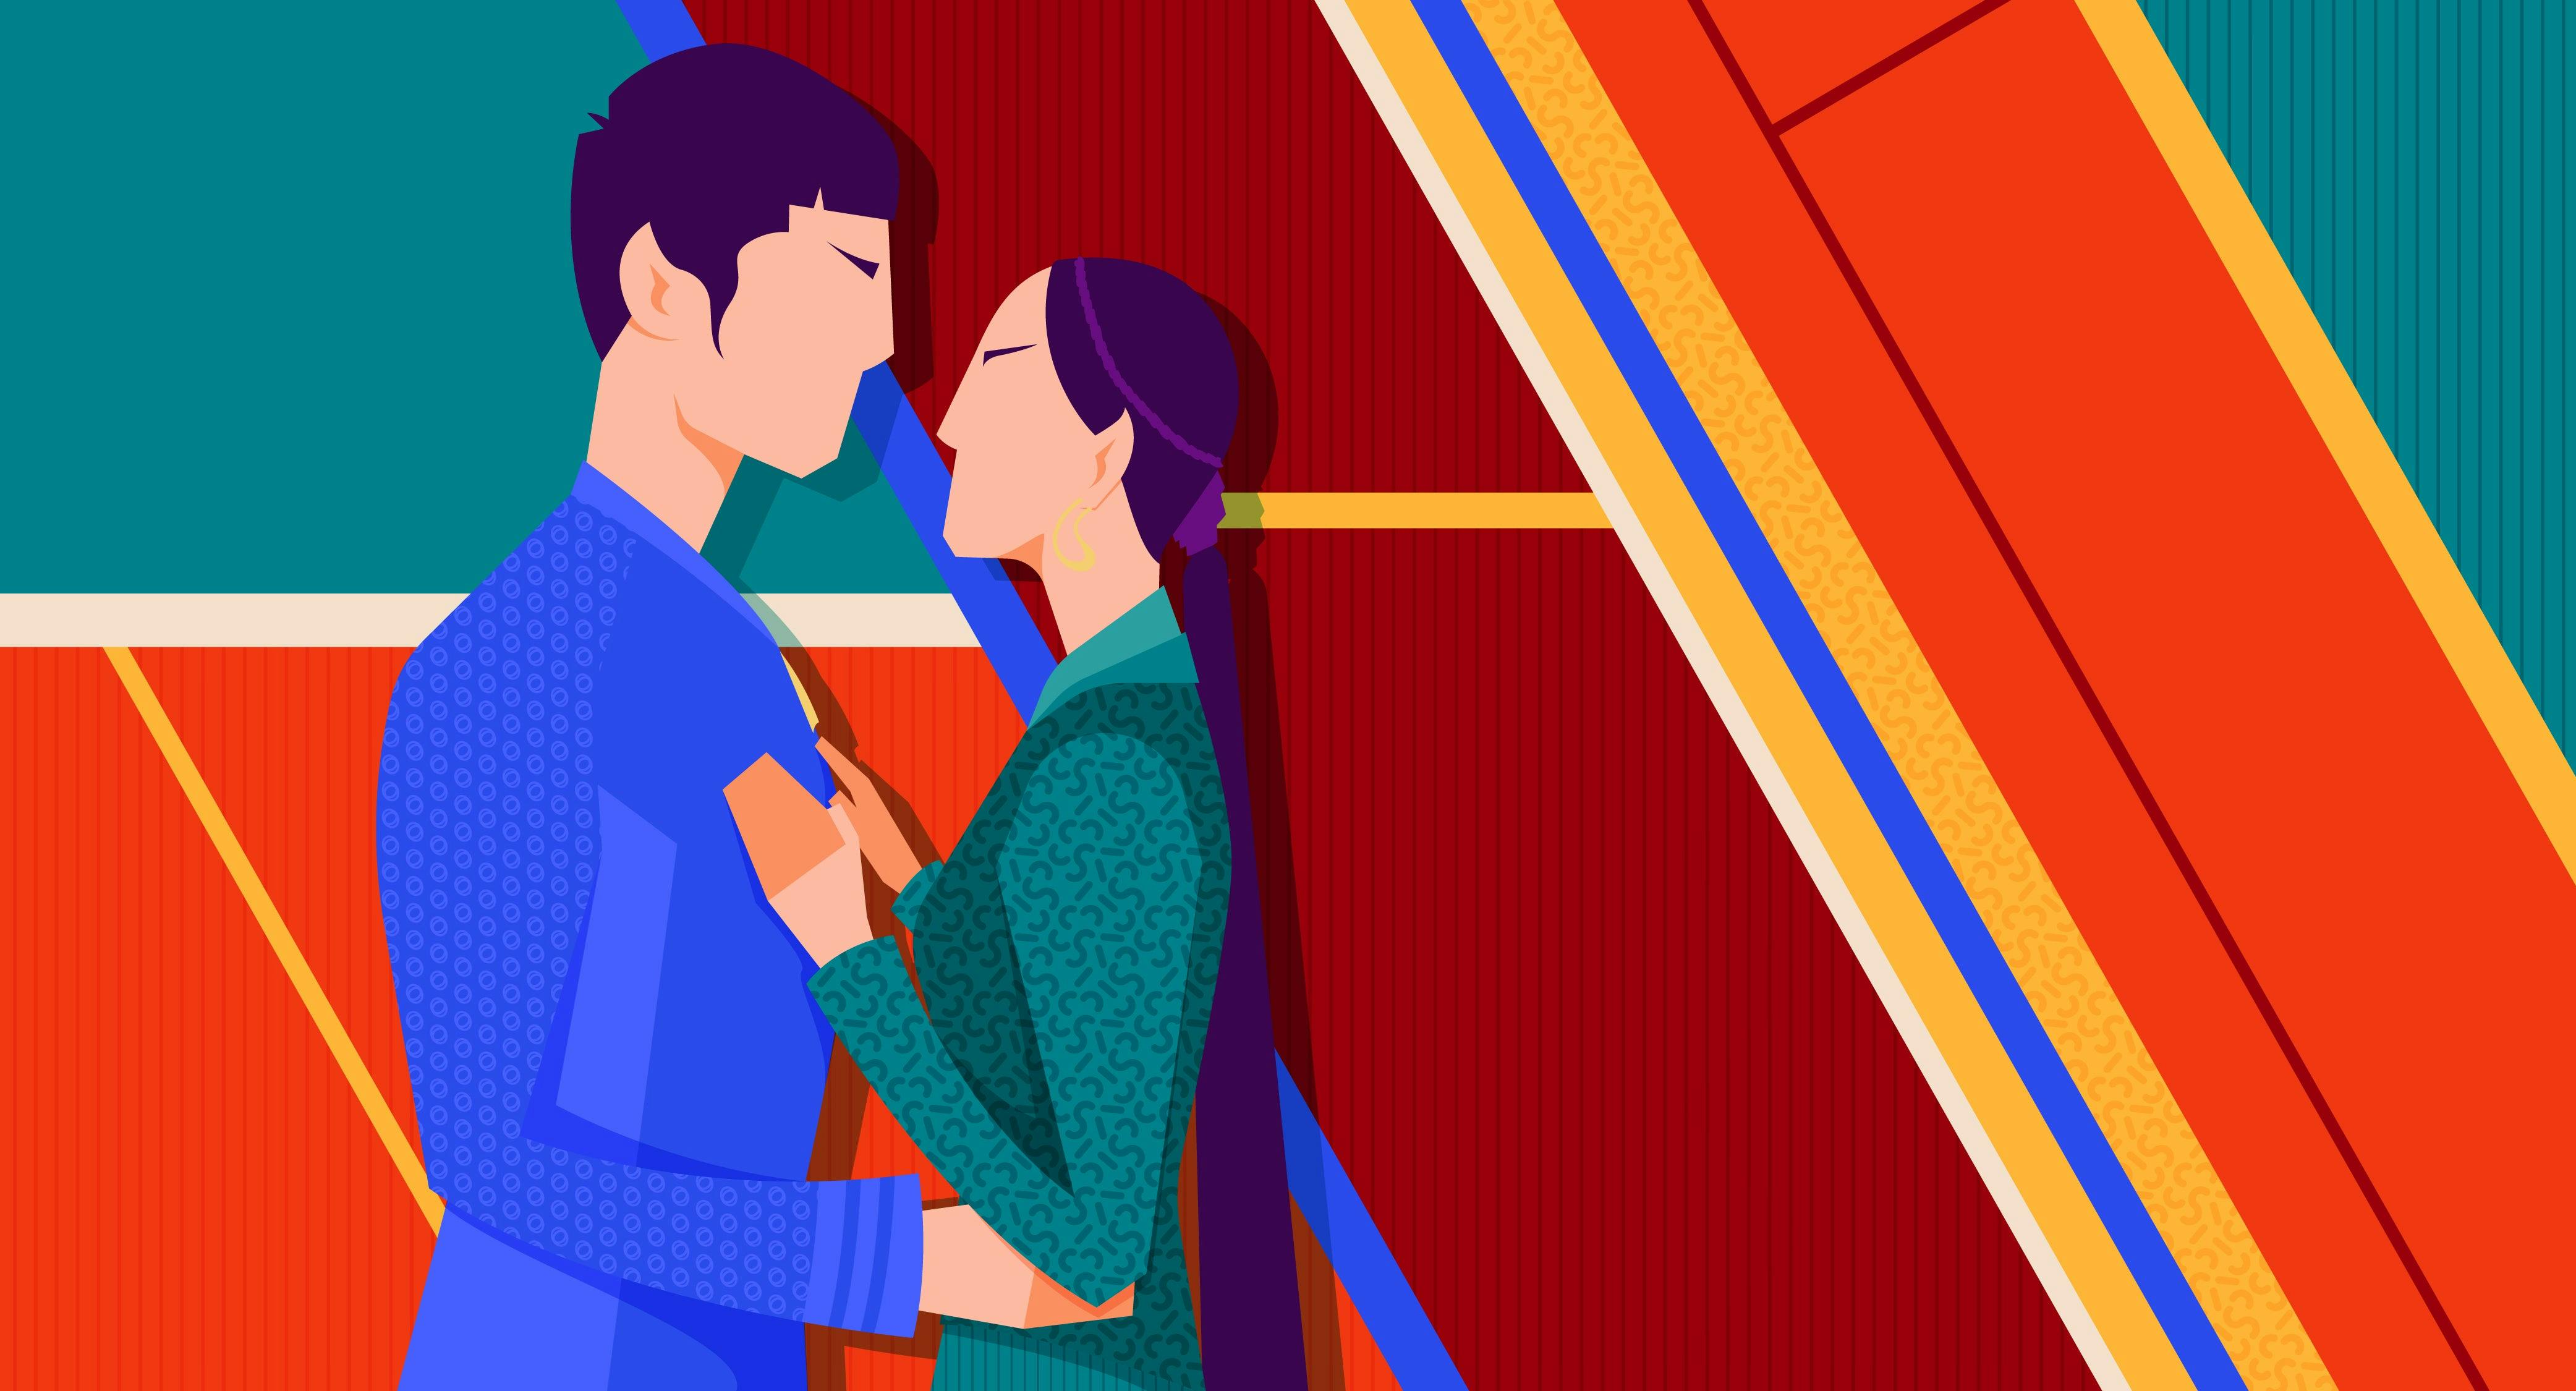 An illustrated Spock and T'Pring (Strange New Worlds) embracing against a red and teal background.